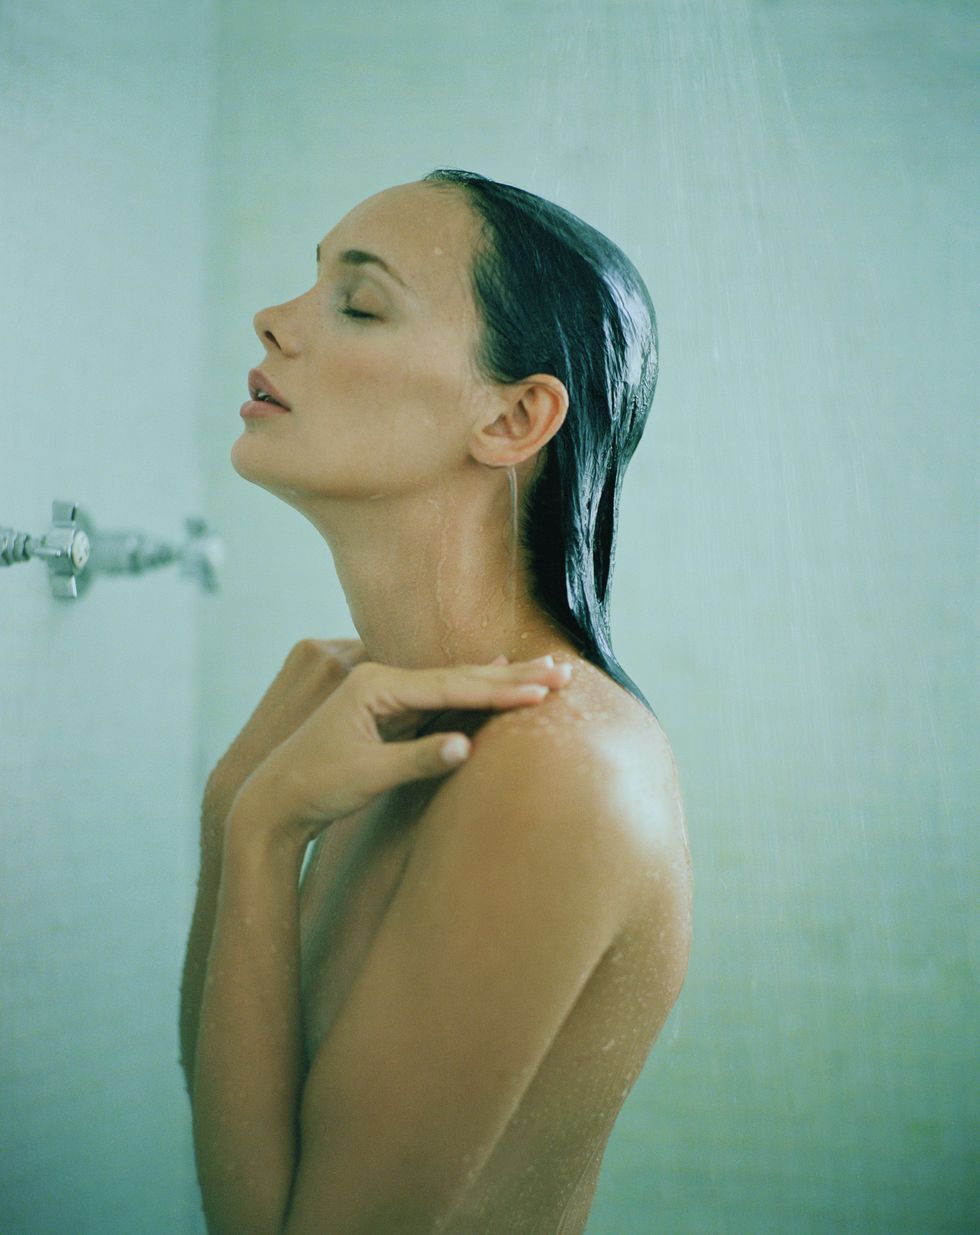 Young woman taking shower, side view